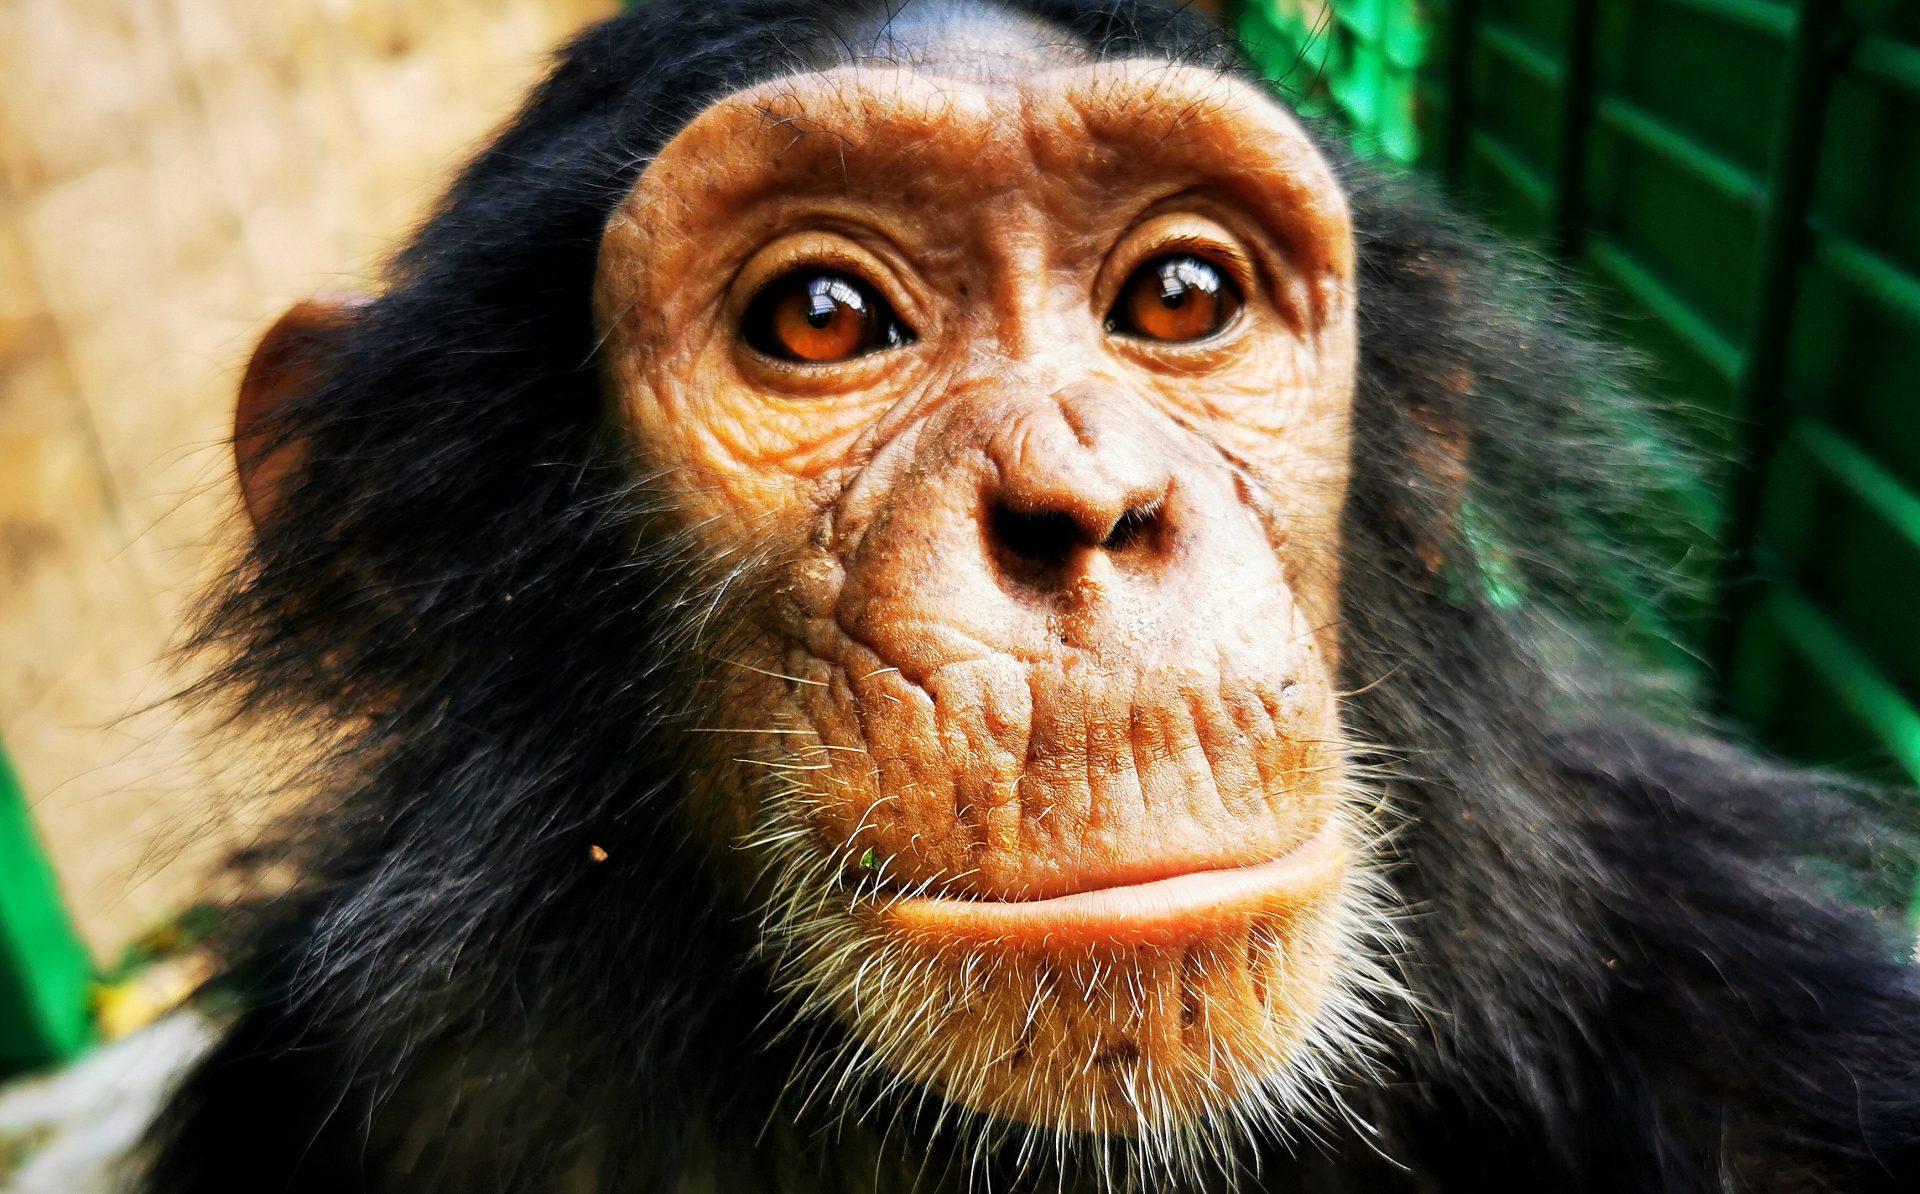 GIVING DAY FOR APES IS… TODAY!